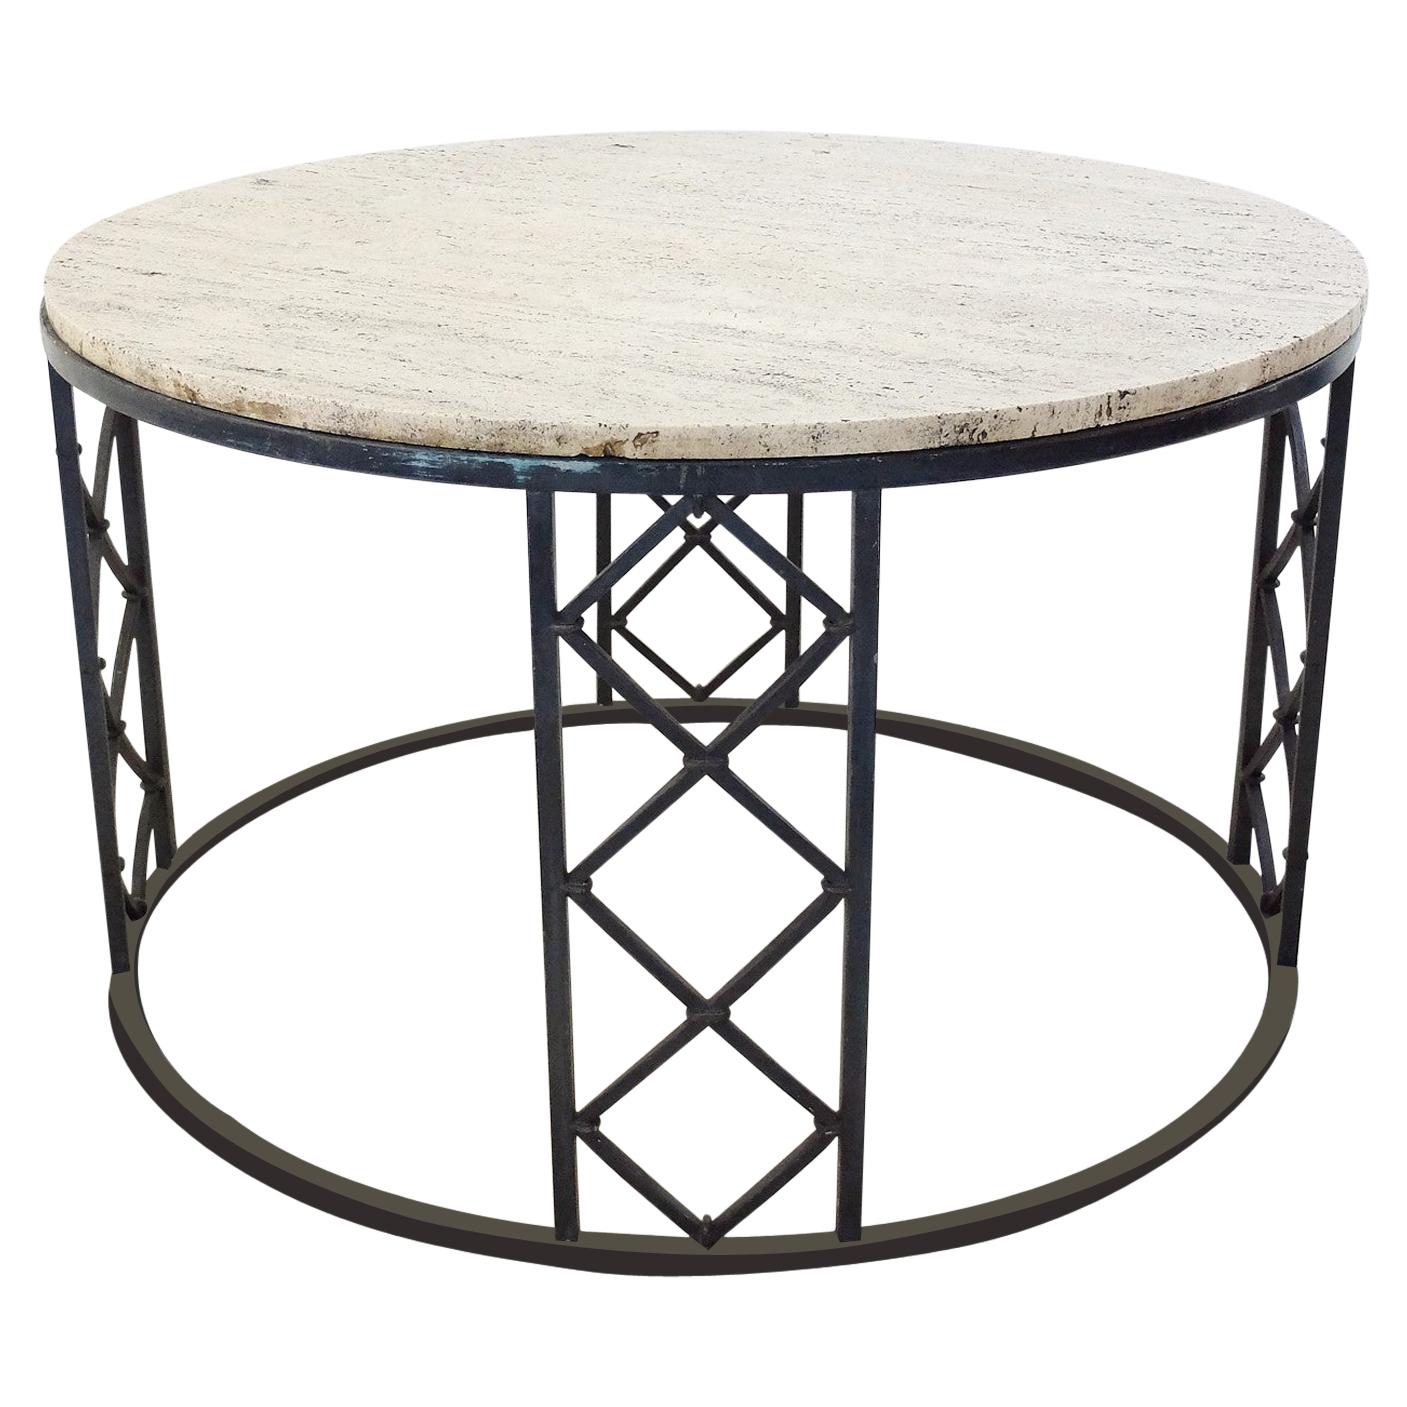 Travertine and Wrought Iron Circular Coffee Table, 1940s